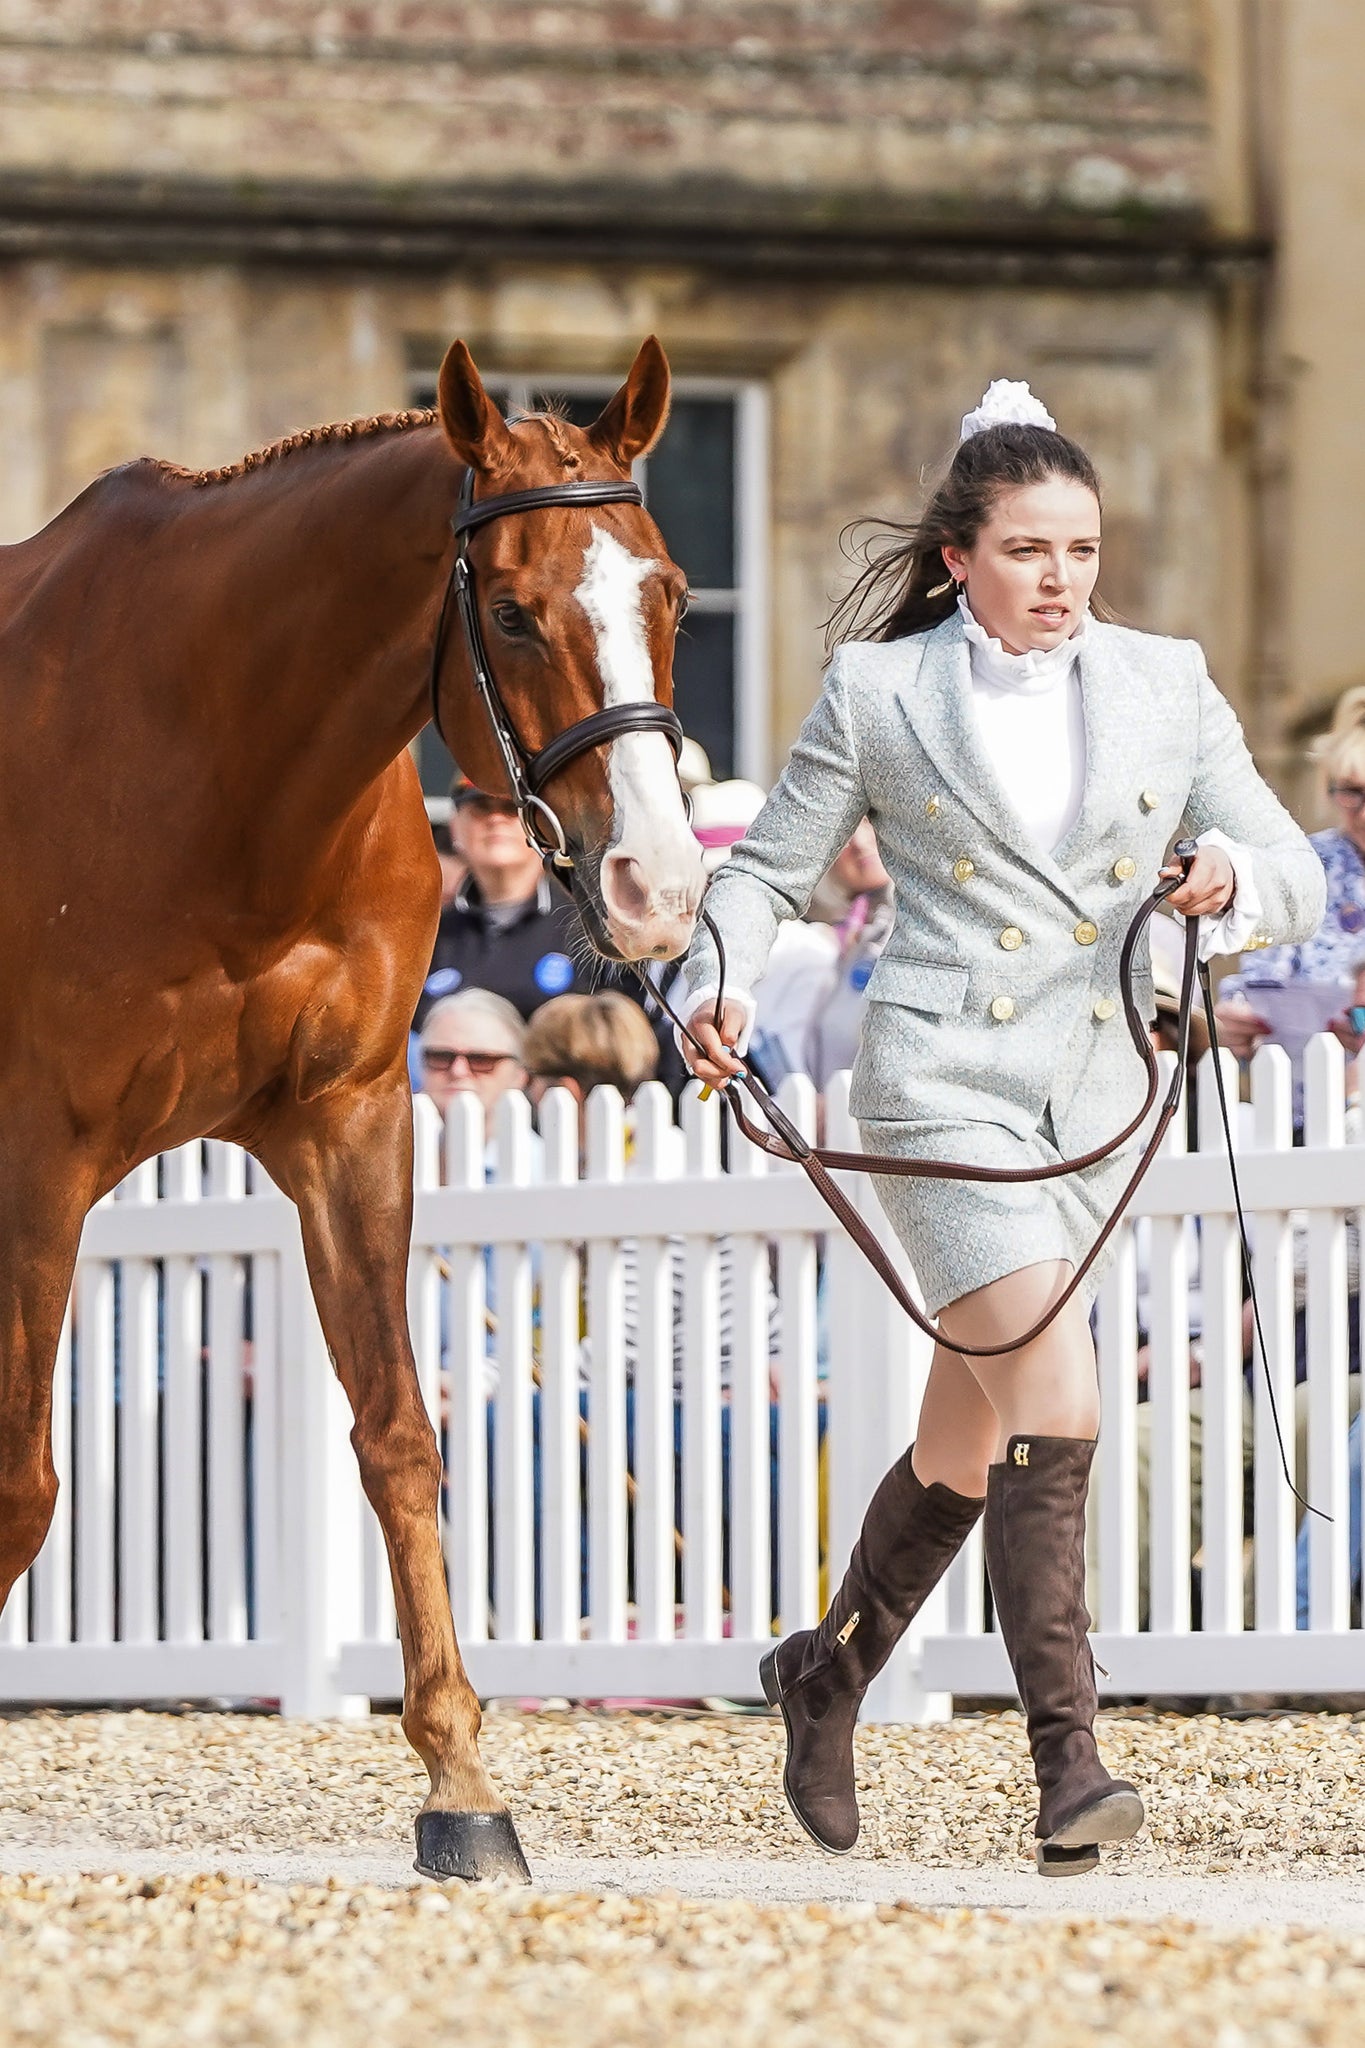 Georgia Bartlett's Trot Up Look One